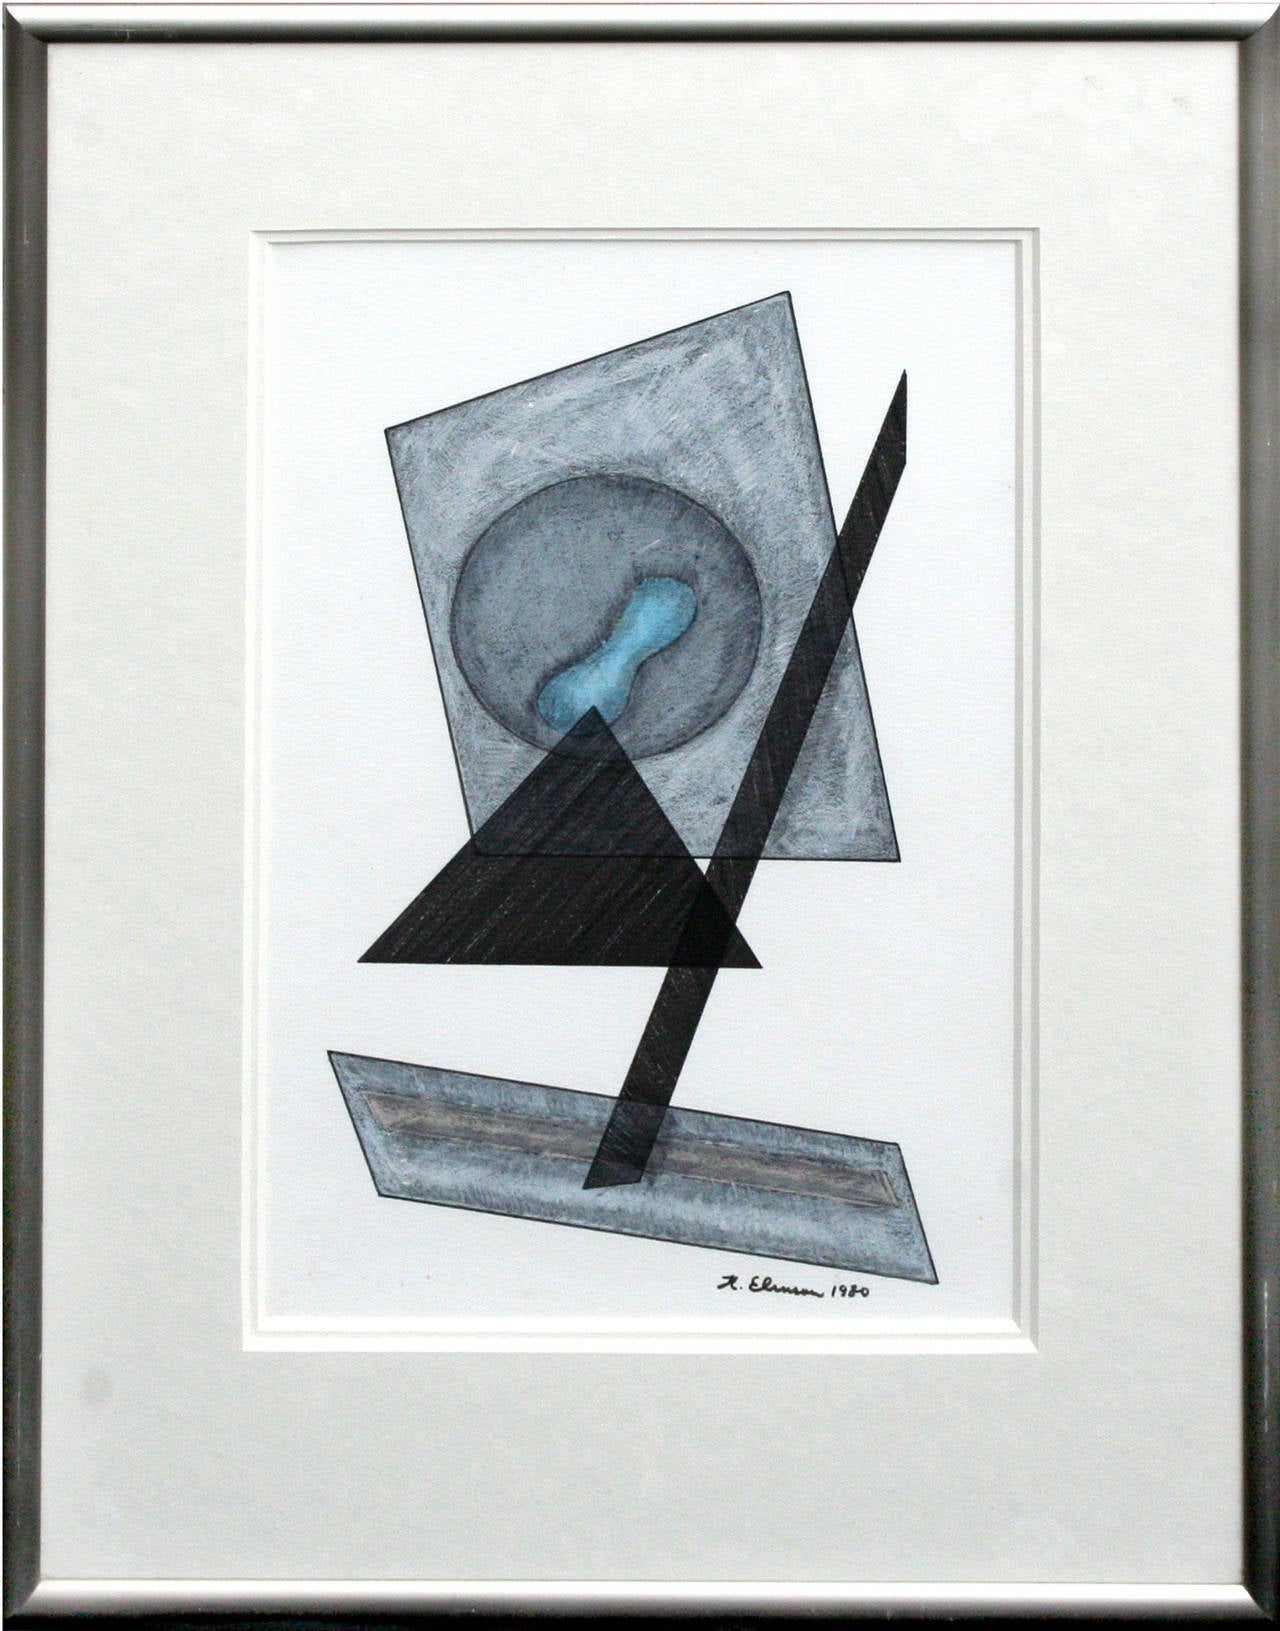 Mixed media by Henry Elinson (American, 1935-2010). Signed lower right. Framed. Elinson was featured in a 2011 show, 